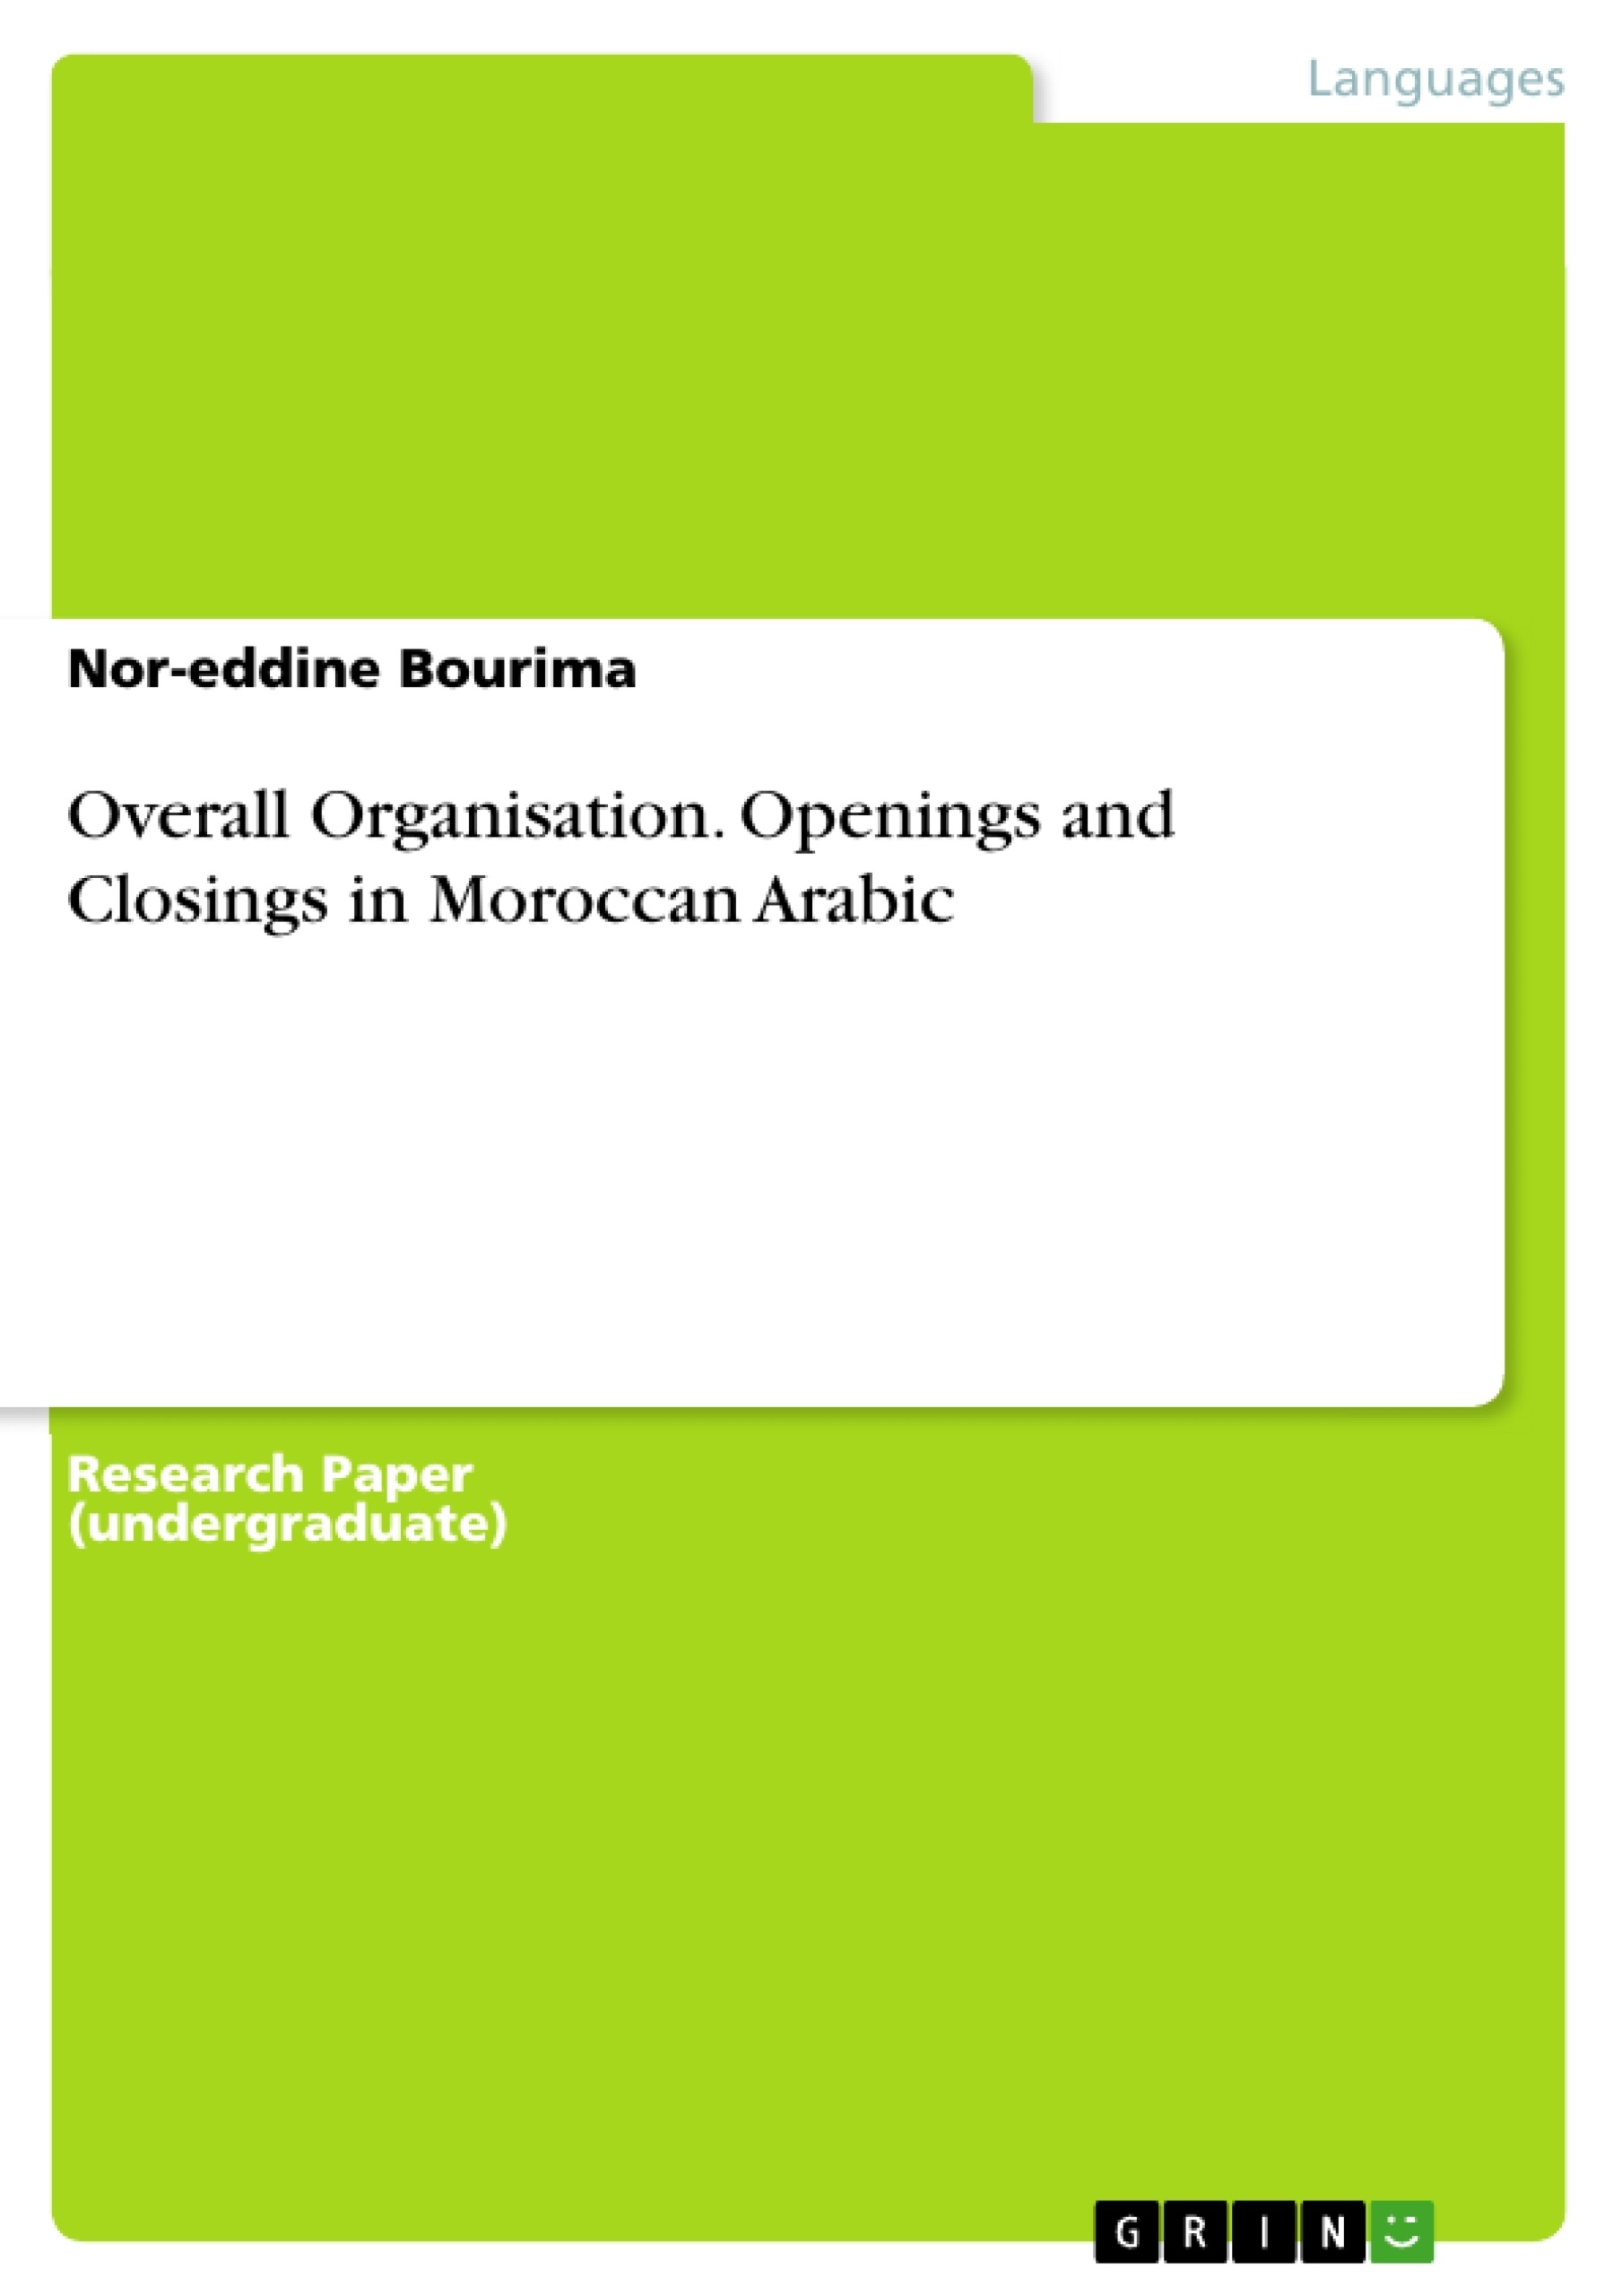 Titre: Overall Organisation. Openings and Closings in Moroccan Arabic